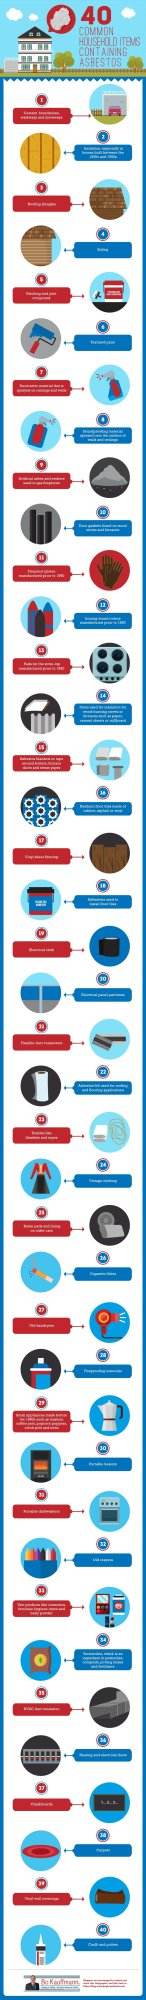 40 Common Household Items Potentially Containing Asbestos - Infographic asbestos